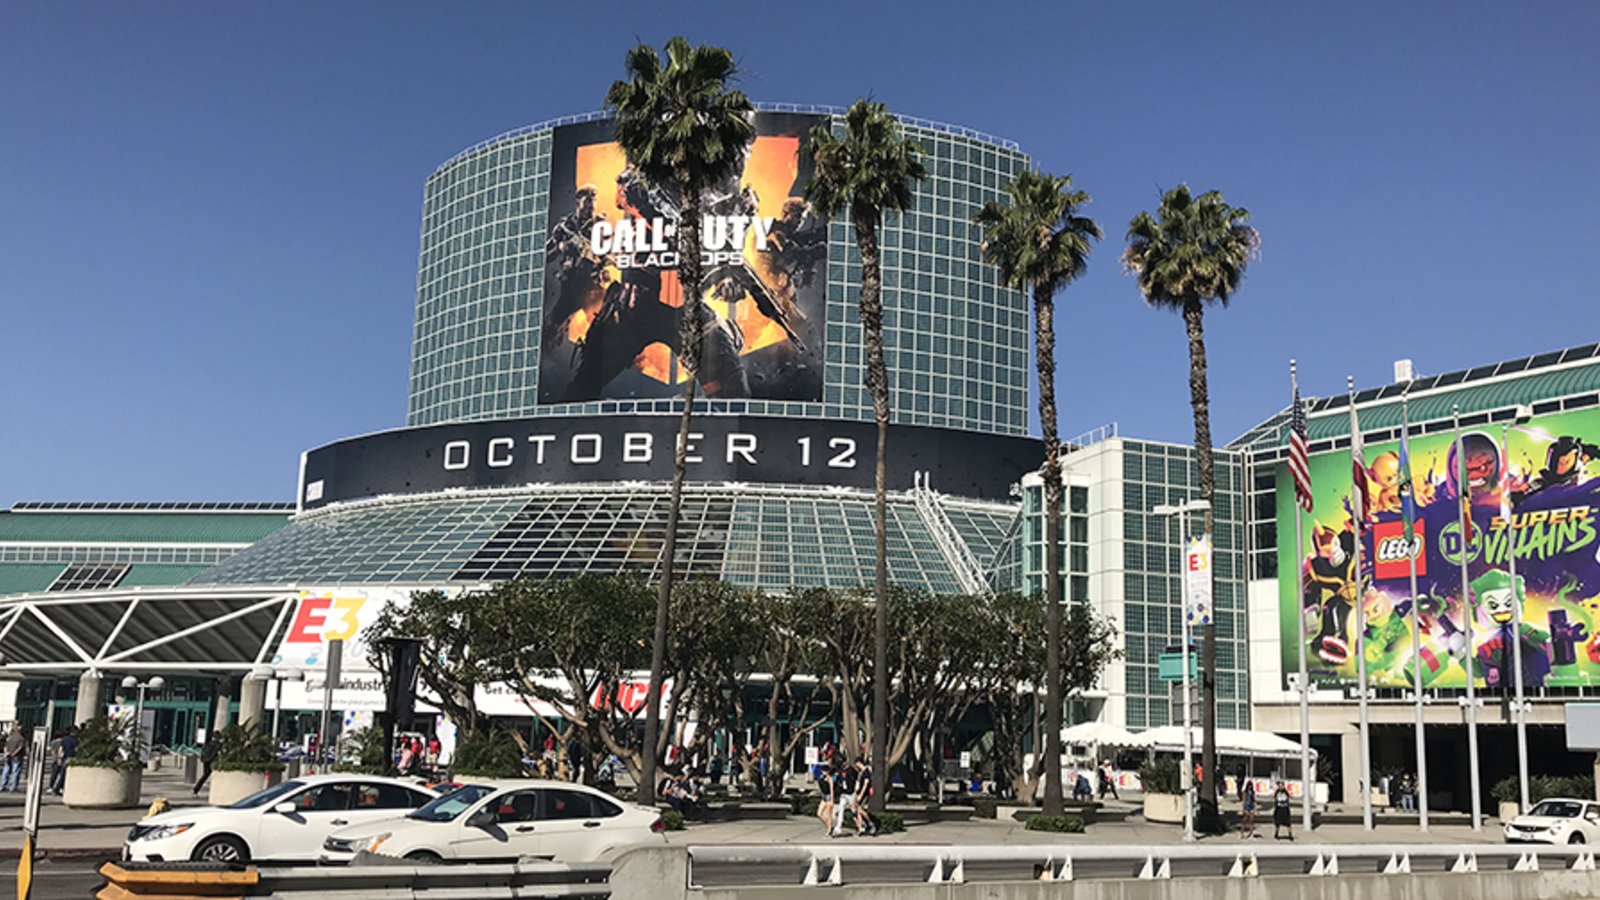 “E3 killed itself,” Jeff Kelly says, not a competition from Summer Game Fest